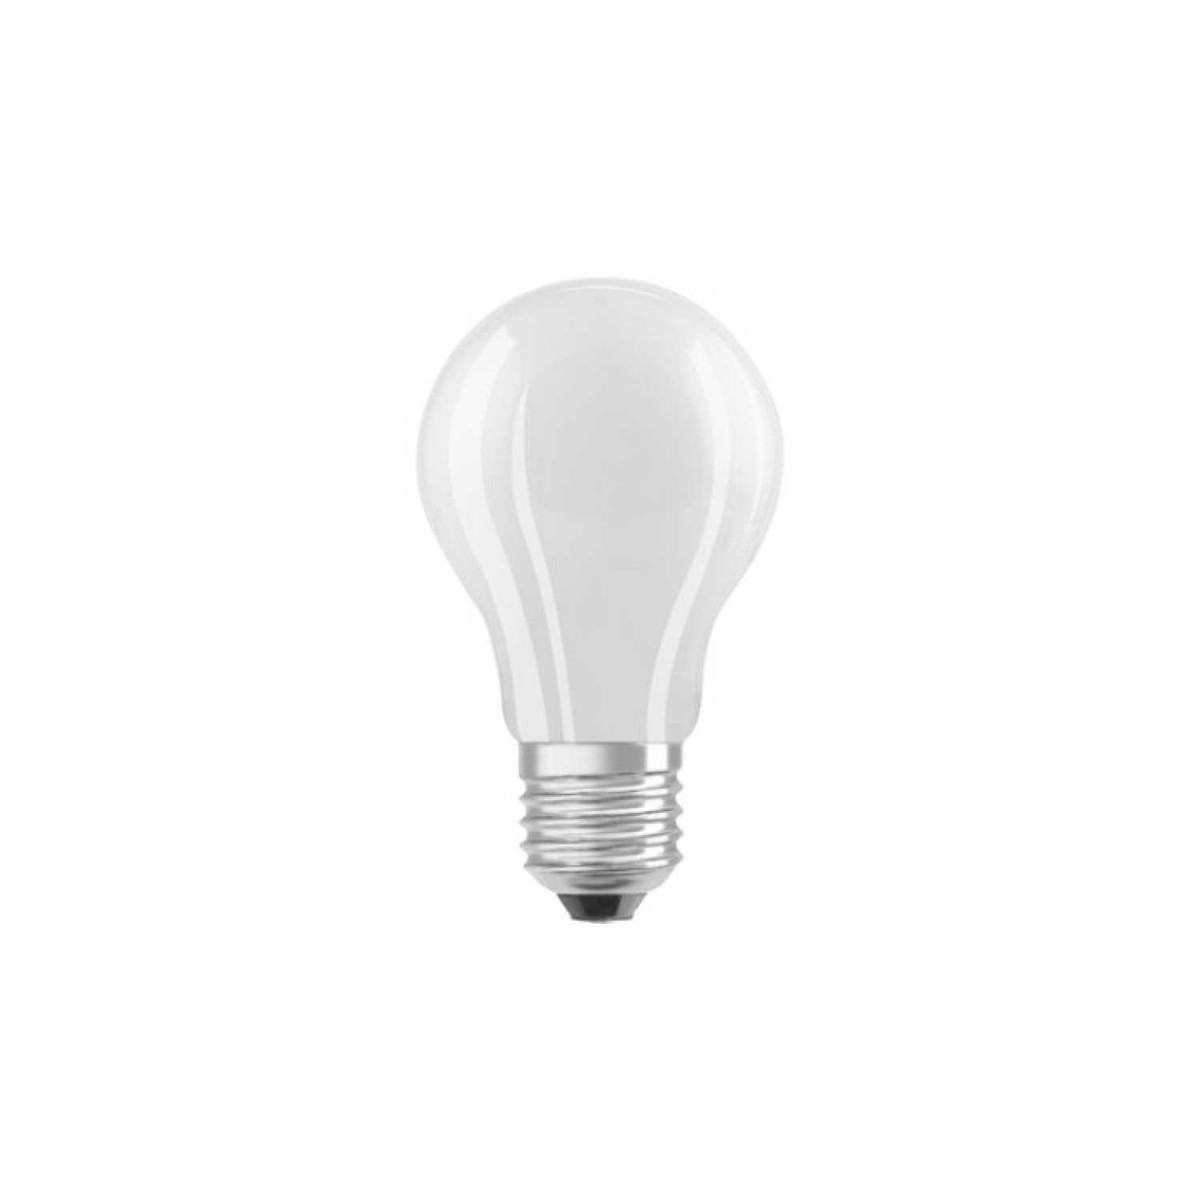 pencil Perceivable Really Osram E27 LED 7W 2700K (60W) Dimmable - Lampefeber